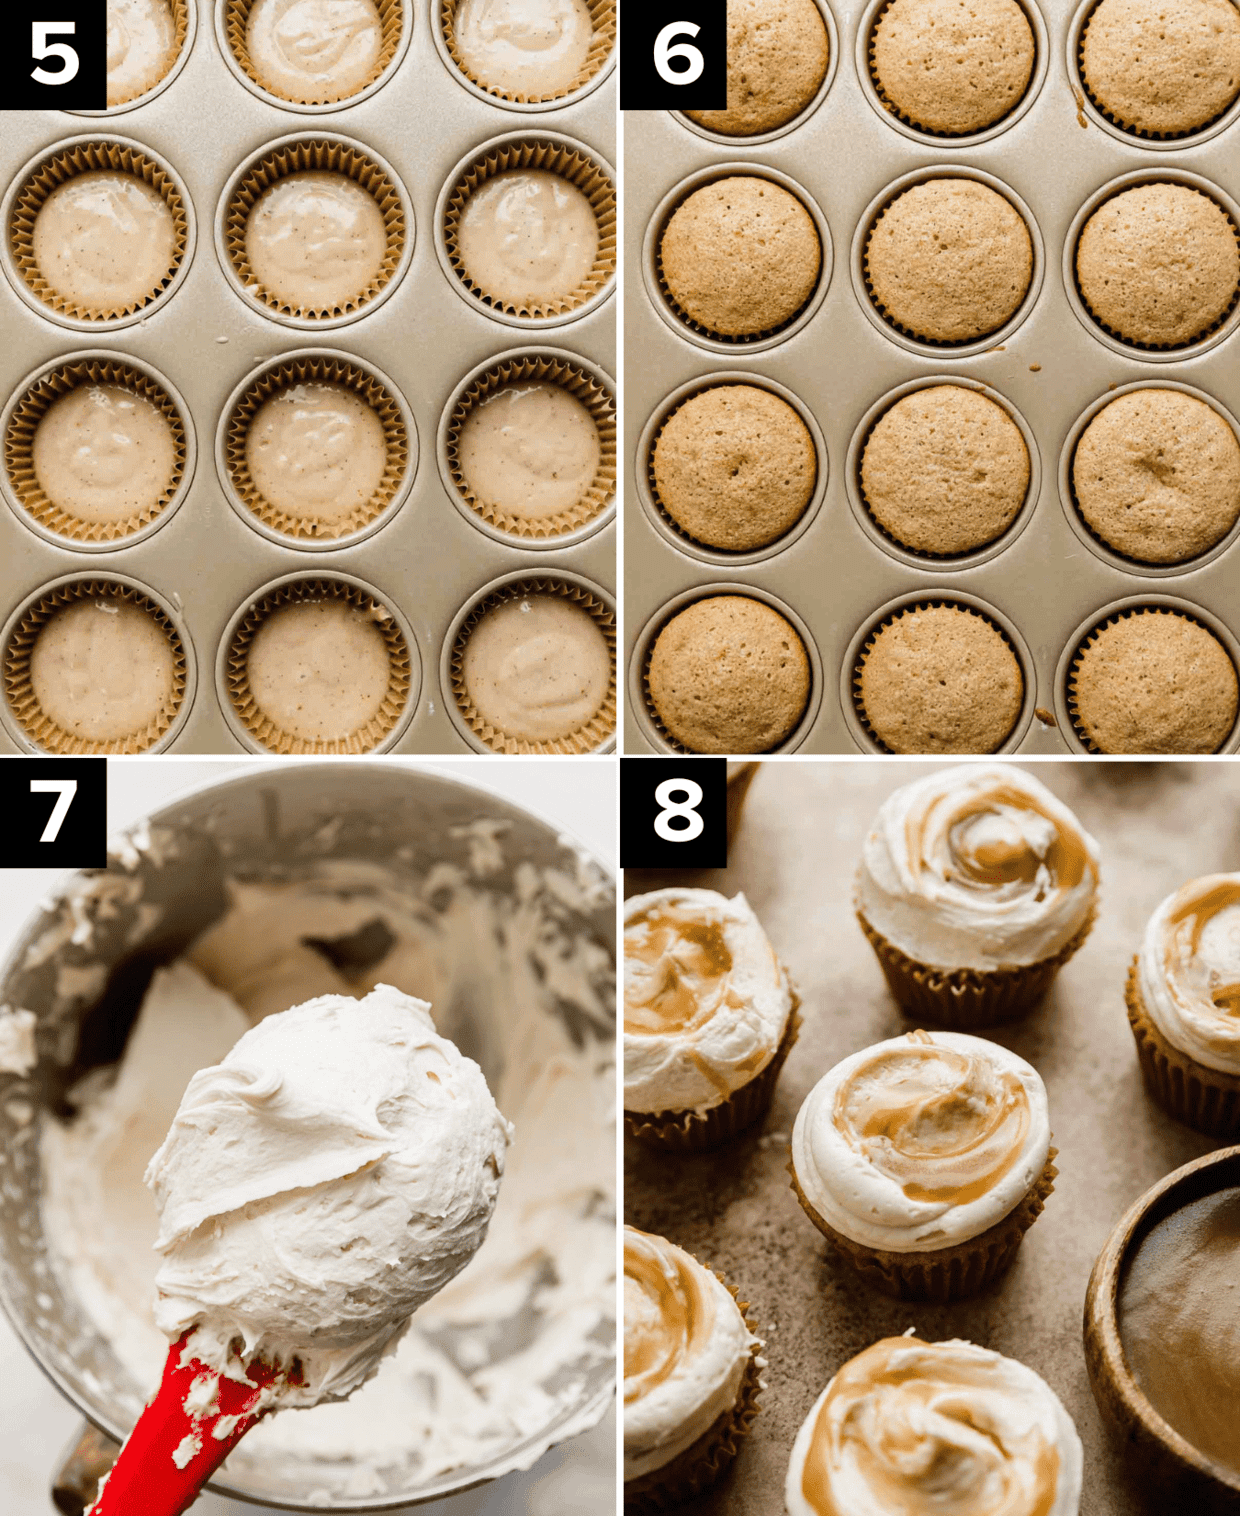 Four photos, top left is Butterscotch Cupcakes unbaked, in a muffin tin. Top right photo is baked Butterscotch Cupcakes in a muffin pan. Bottom left photo is butterscotch frosting on a red spatula, bottom right image is butterscotch frosting and sauce topped Butterscotch Cupcakes.